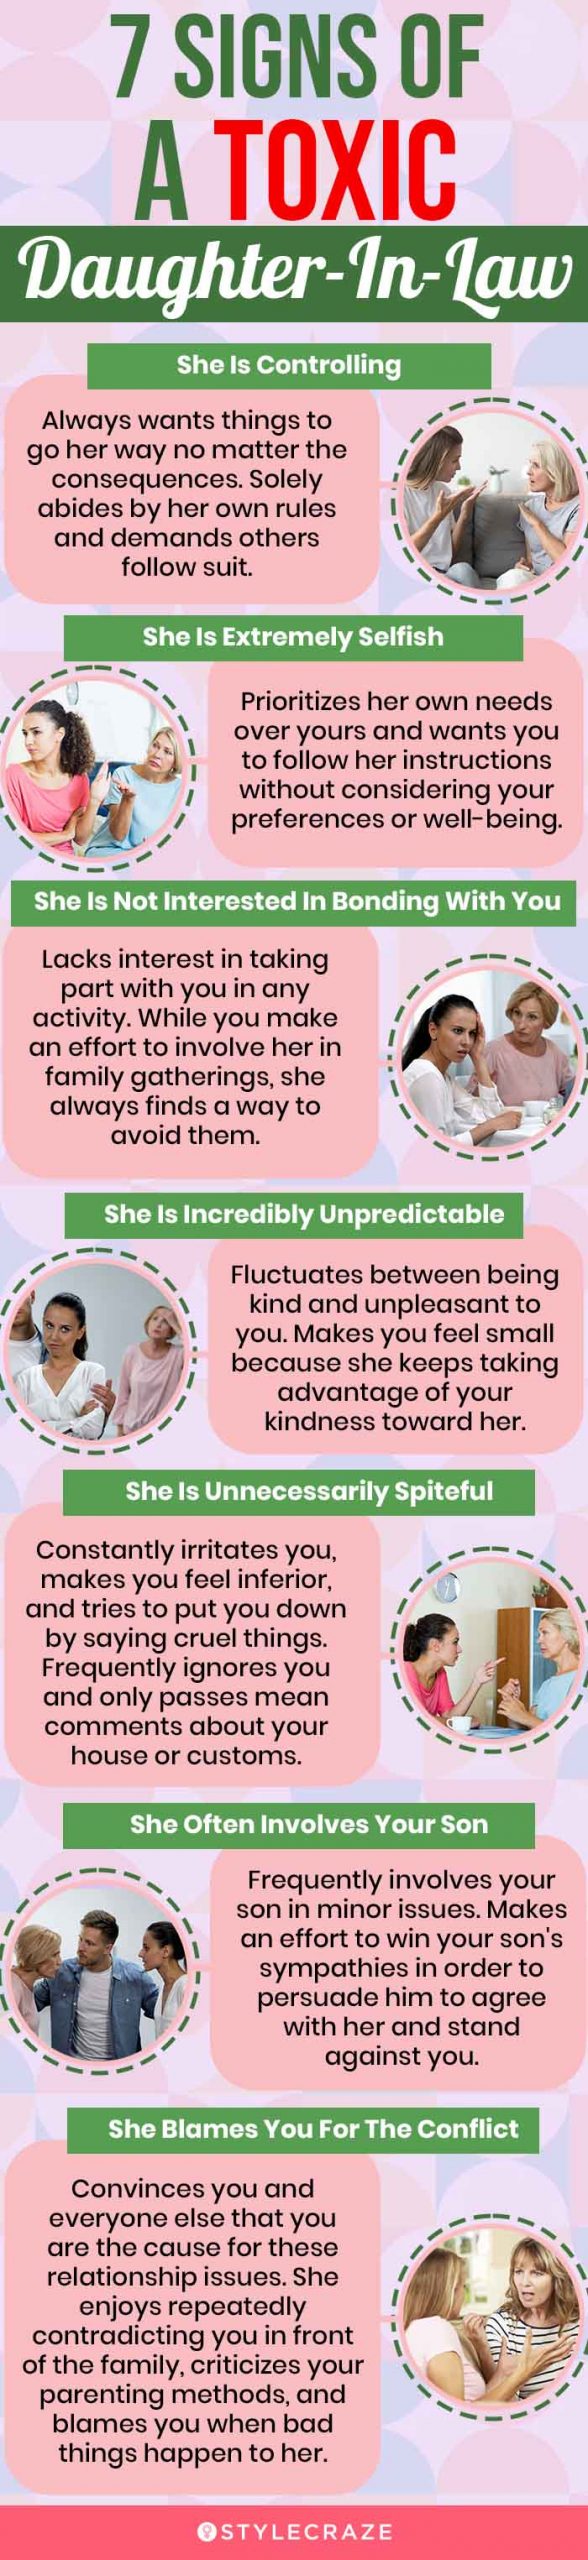 7 signs of a toxic daughter in law (infographic)